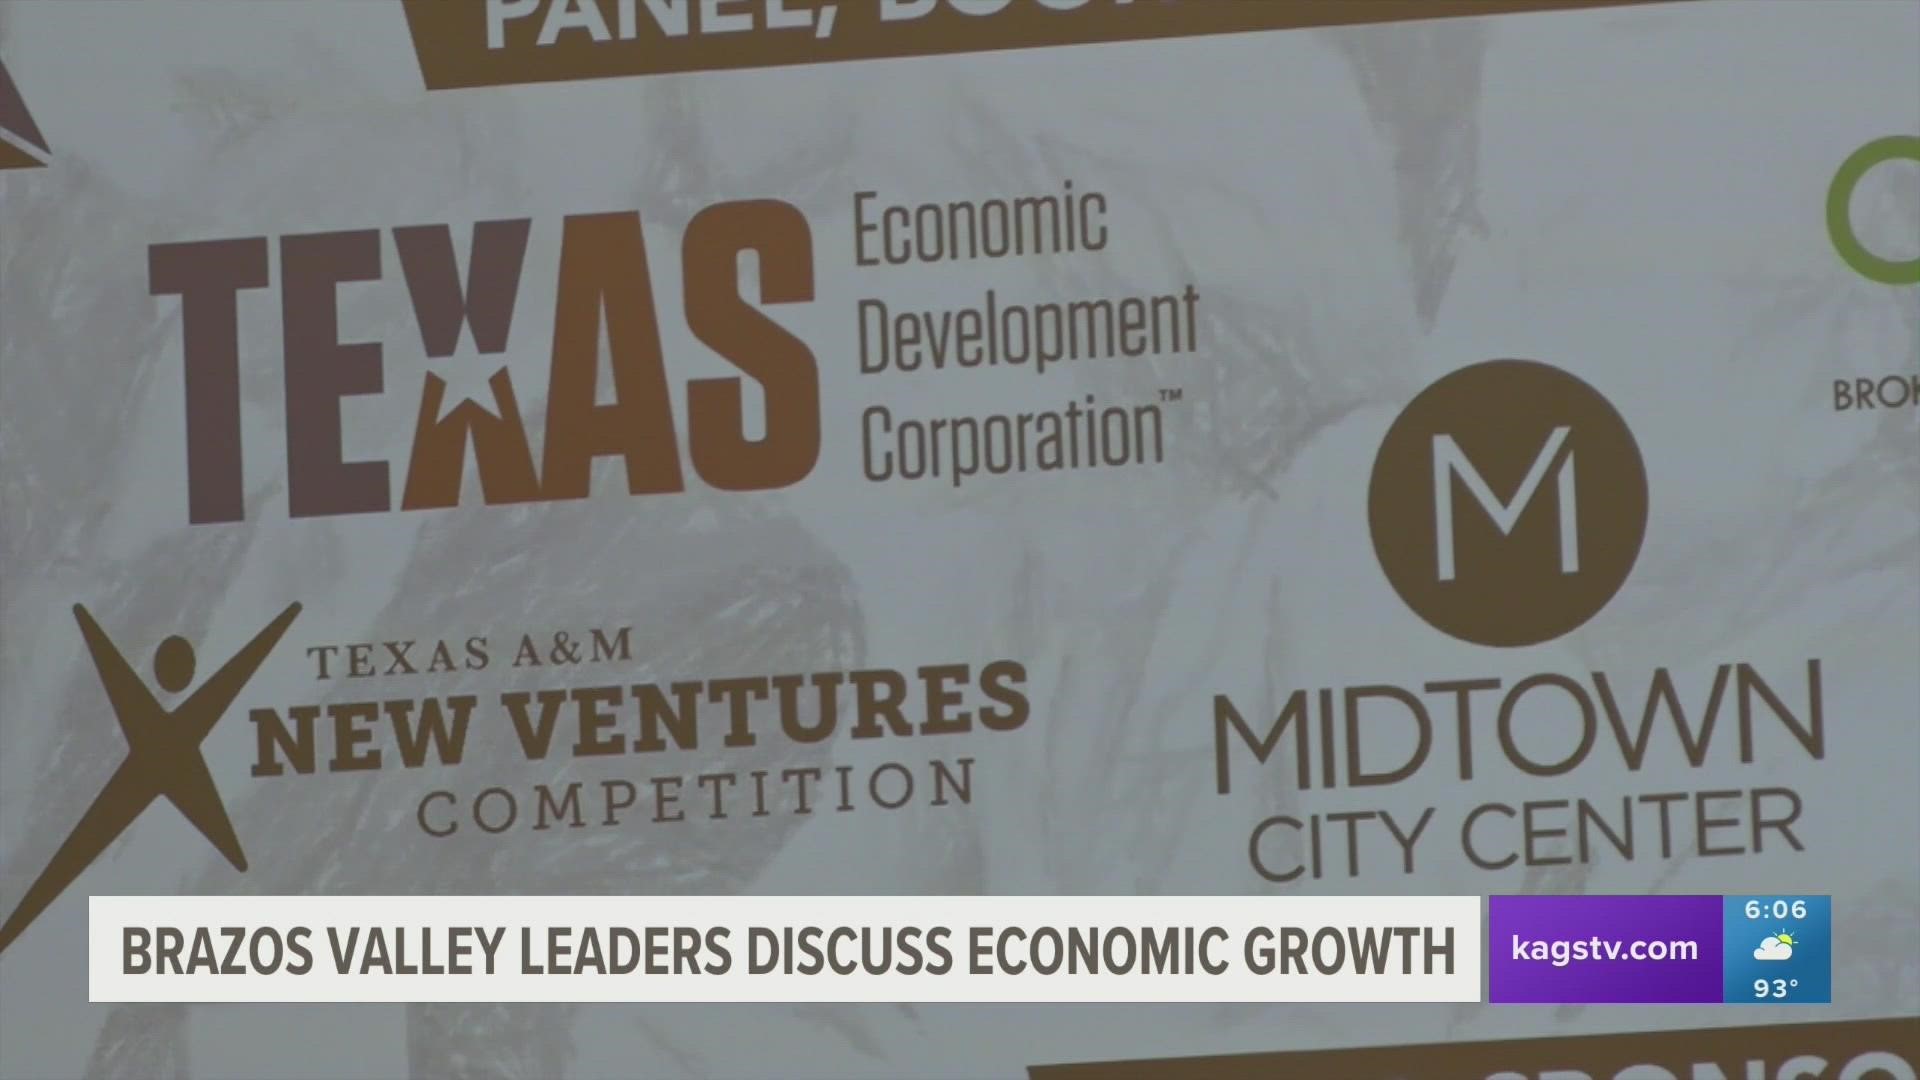 Robert Allen, the President of the Texas Economic Development Corporation, said that boosting the economy starts in diversifying higher education avenues.